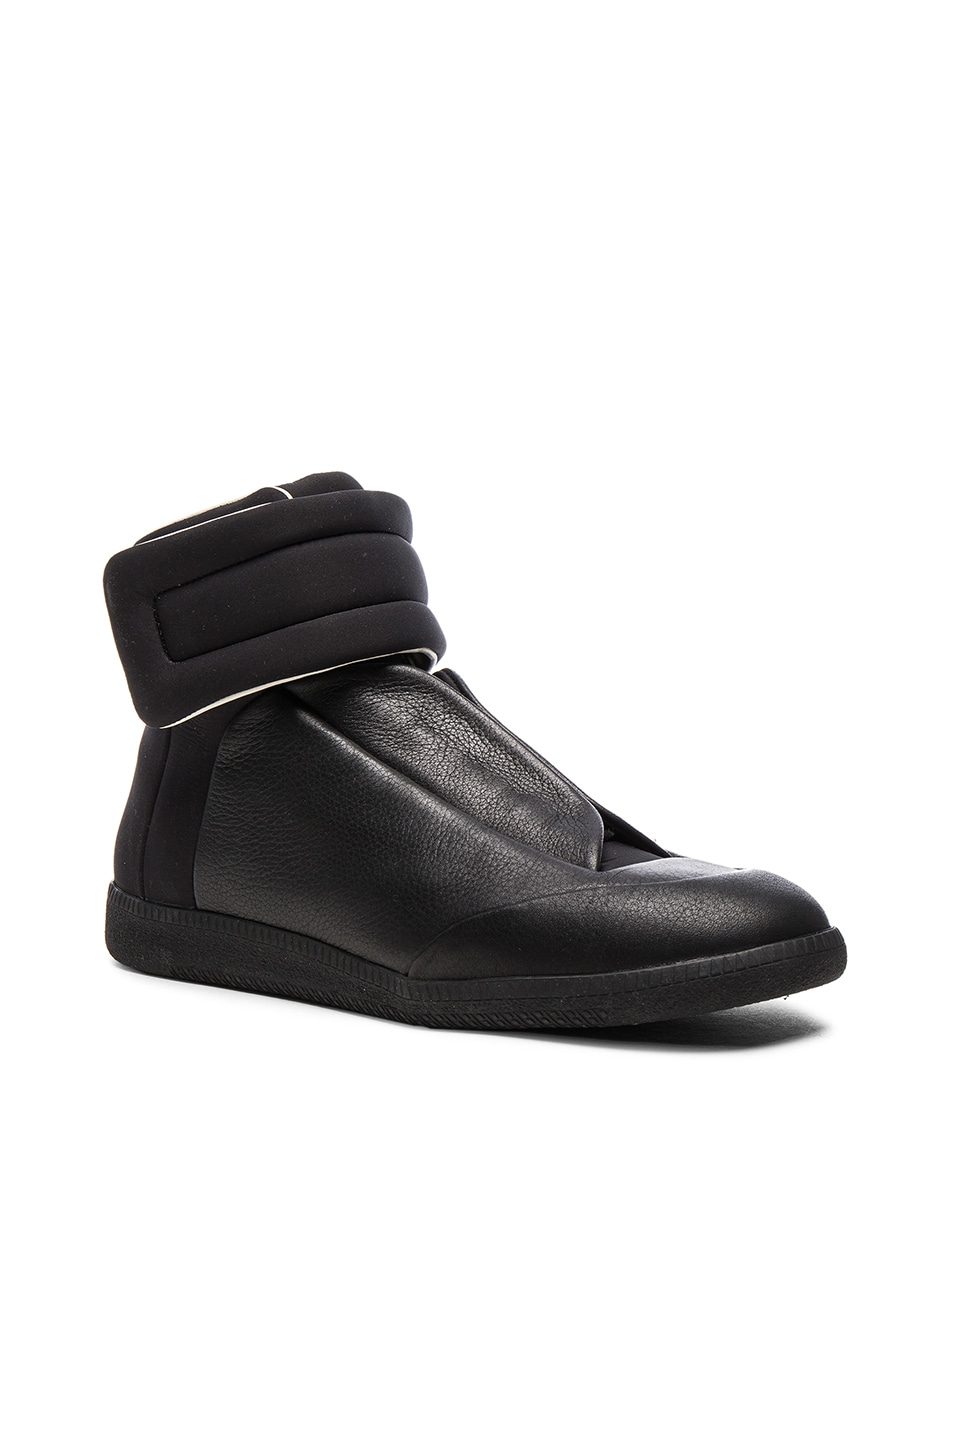 Image 1 of Maison Margiela Future High Top Sneakers in Black